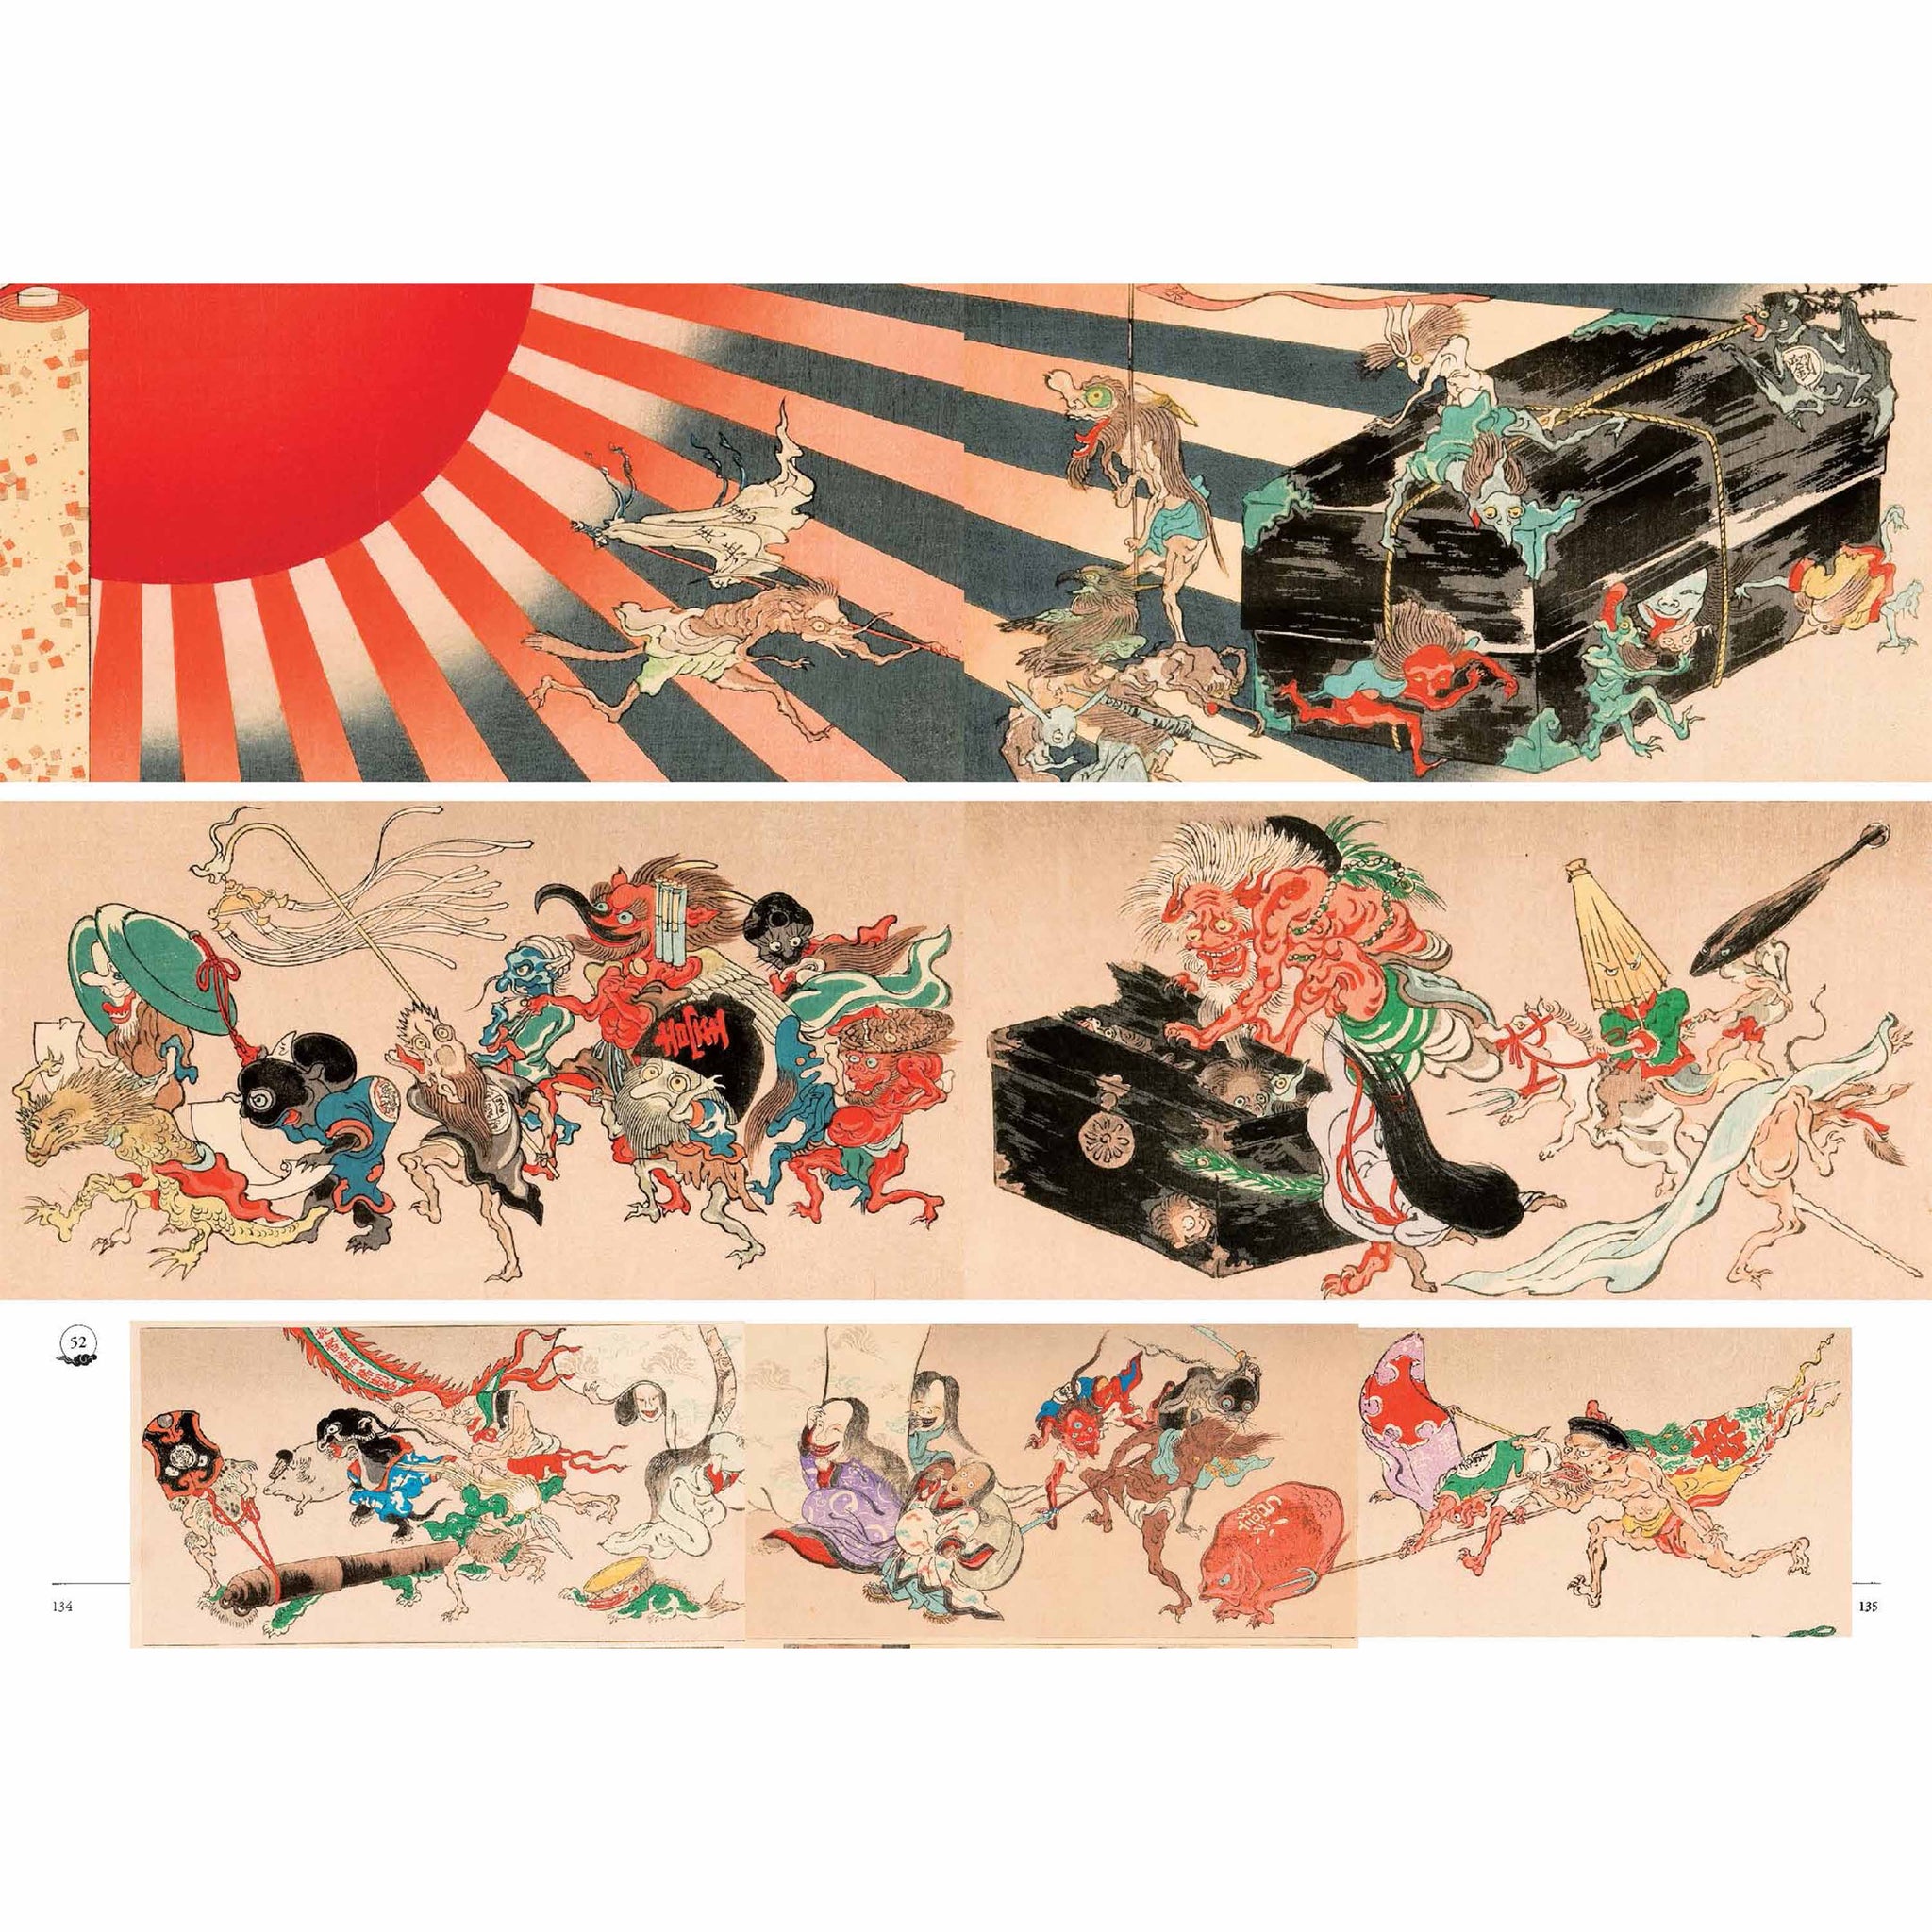 The Yōkai Museum - Japanese ghosts and monsters from the Yumoto Kōichi Collection